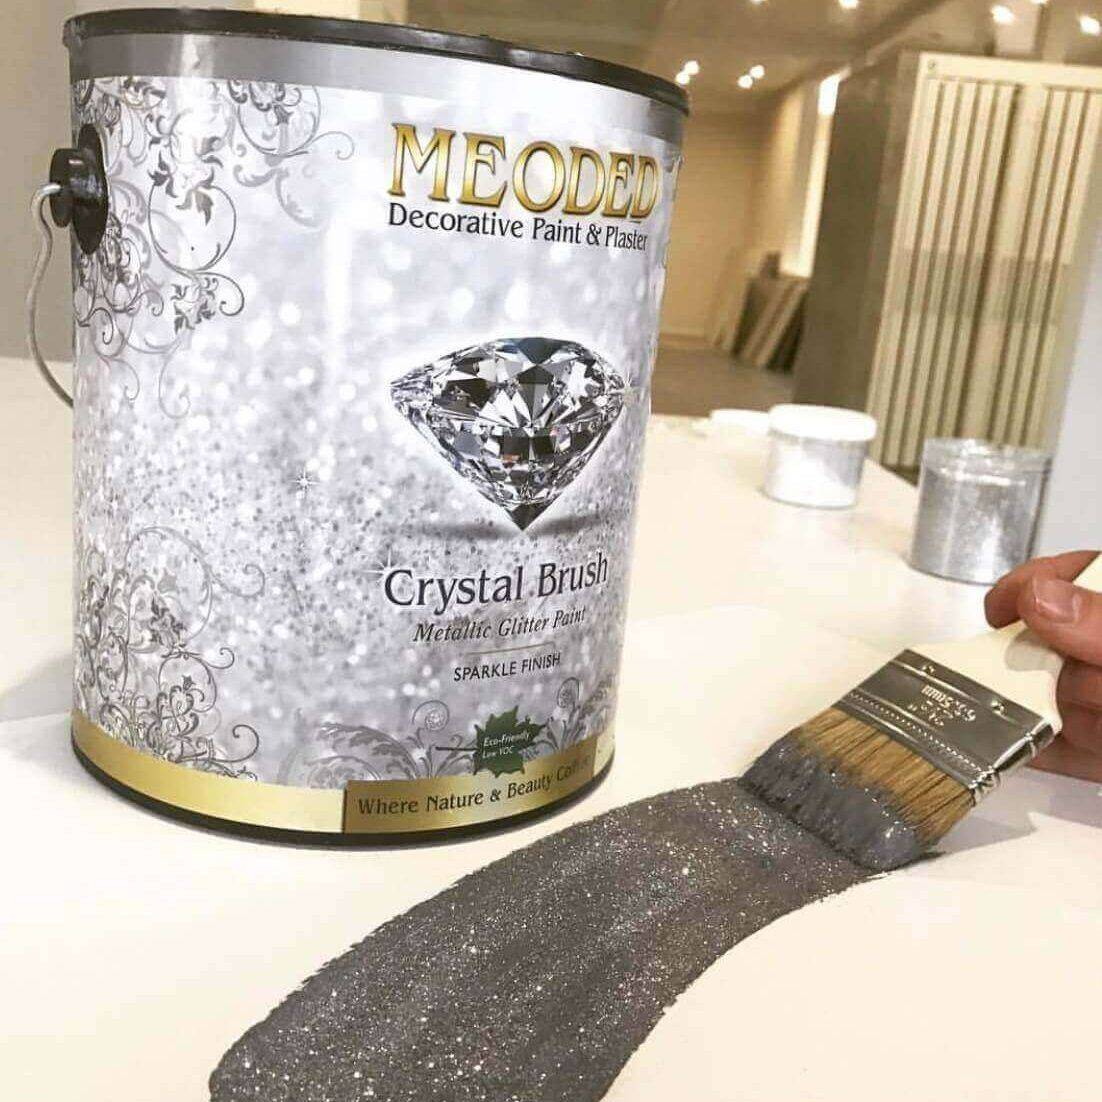 How can I make my walls sparkle? Crystal Brush Glitter Paint